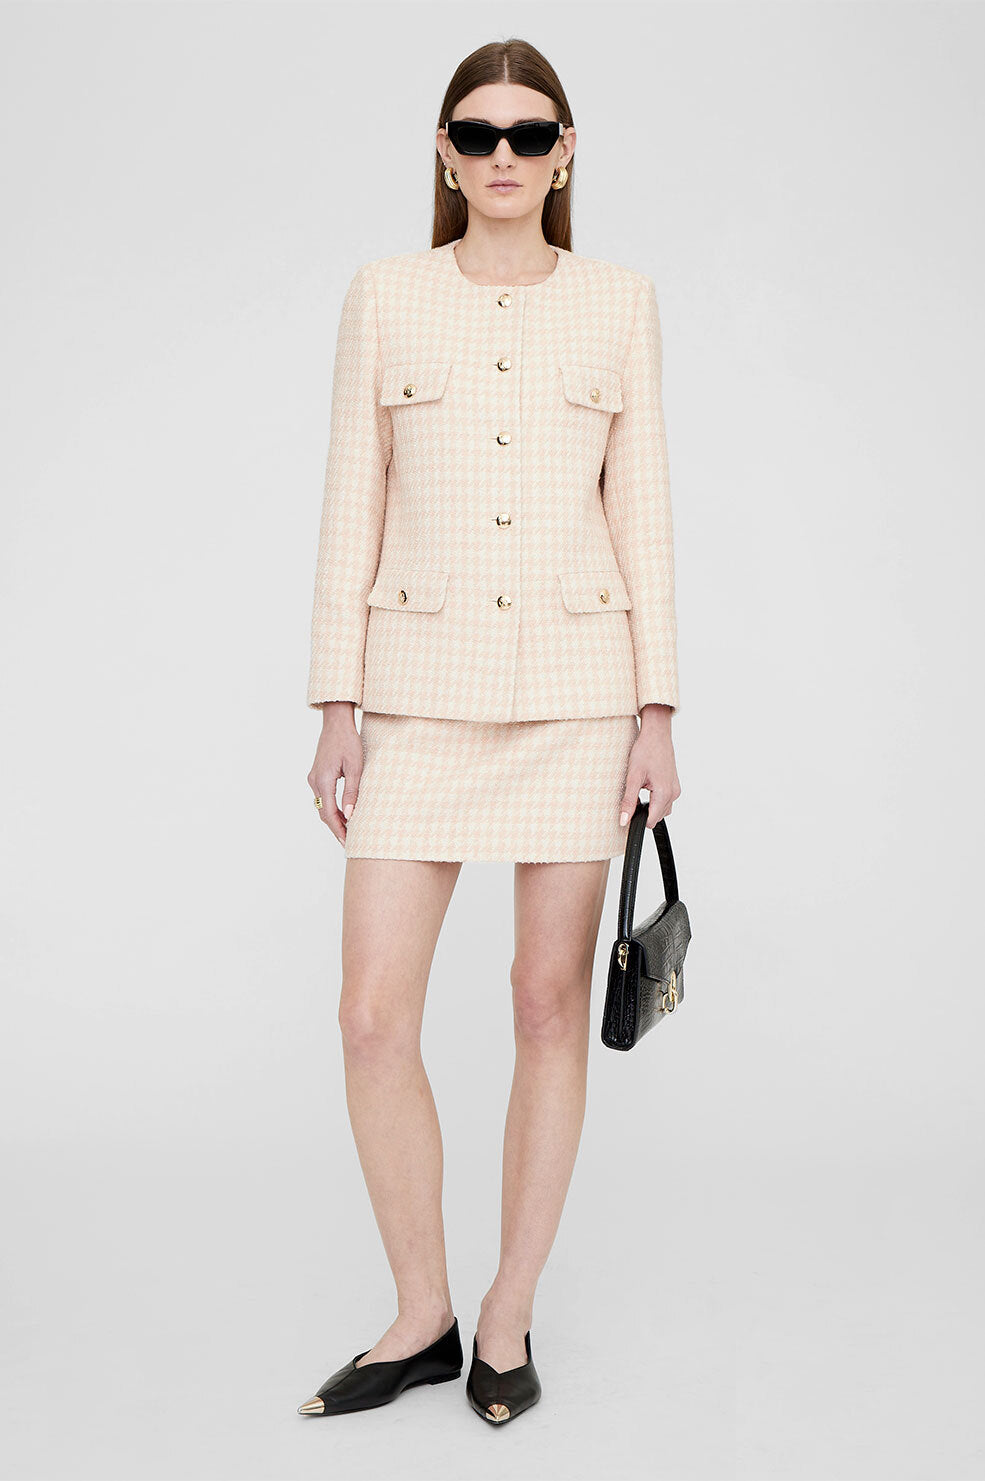 ANINE BING Janet Jacket - Cream And Peach Houndstooth - On Model Front Third Image